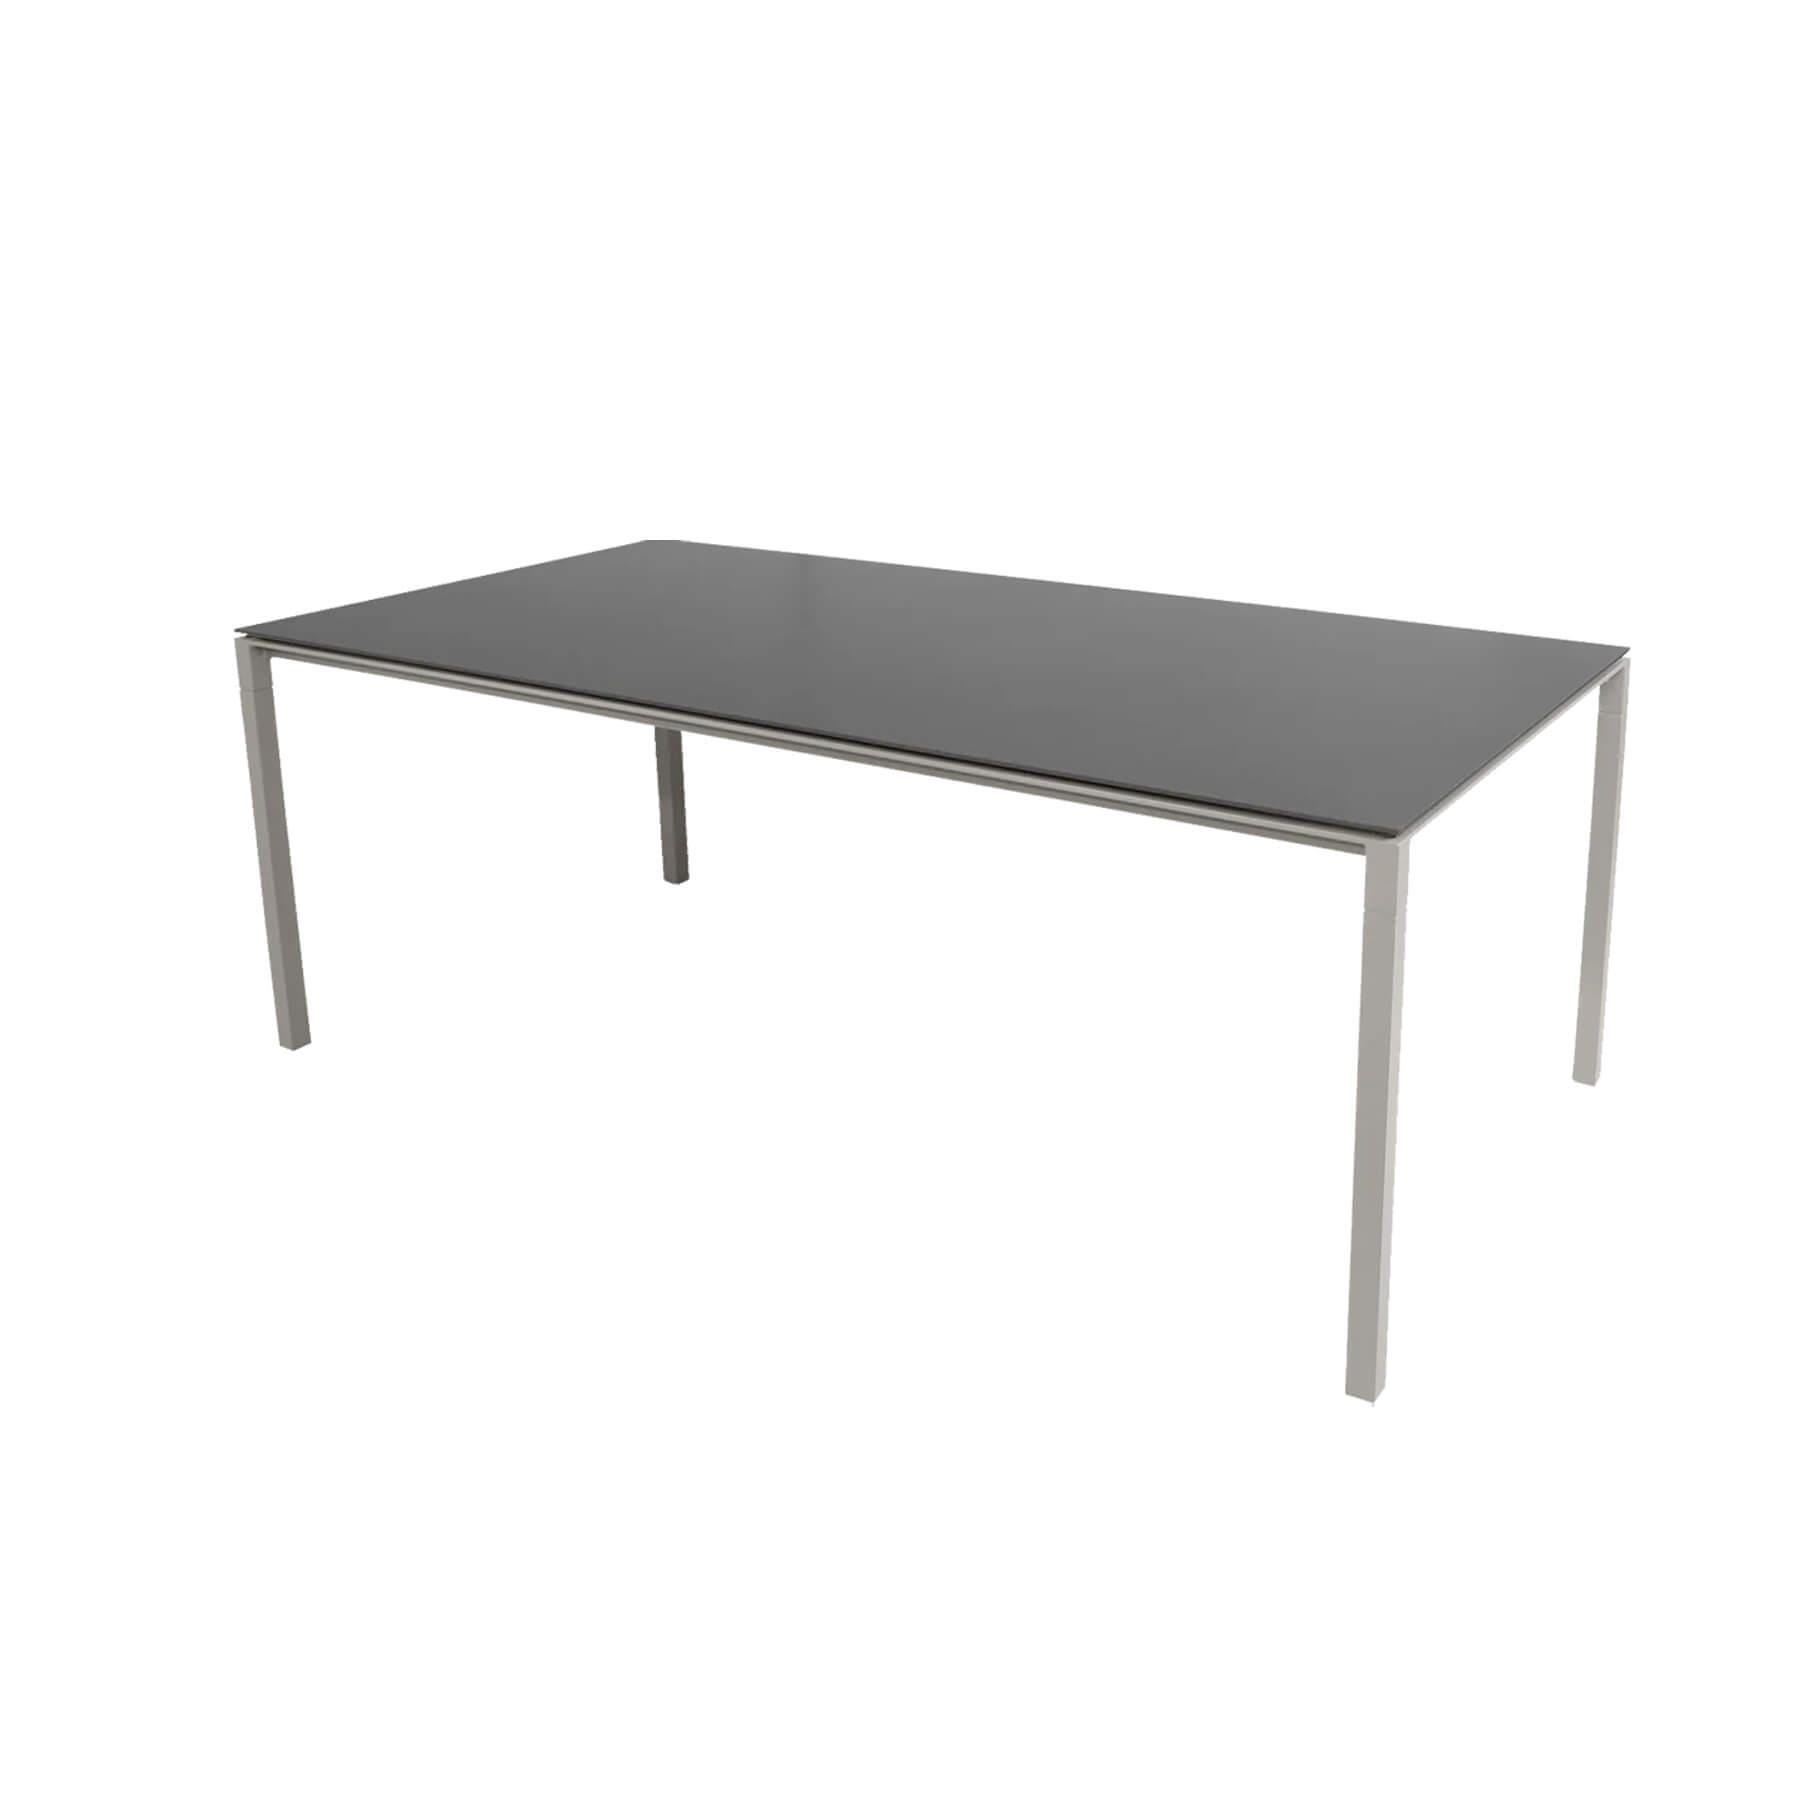 Caneline Pure Outdoor Dining Table Large Ceramic Nero Top Taupe Legs Grey